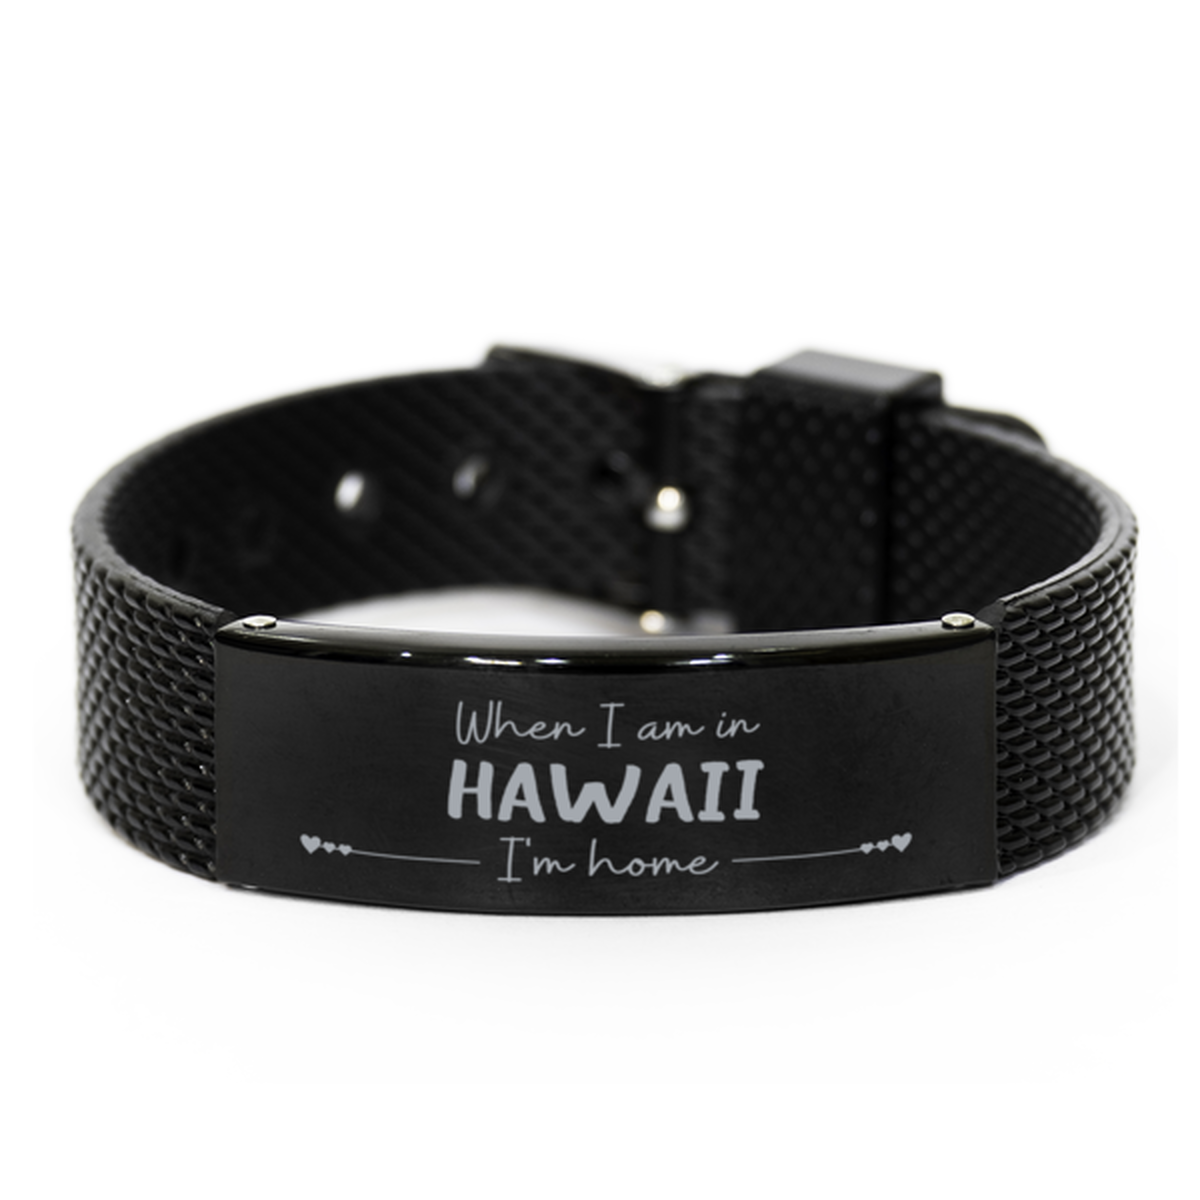 When I am in Hawaii I'm home Black Shark Mesh Bracelet, Cheap Gifts For Hawaii, State Hawaii Birthday Gifts for Friends Coworker